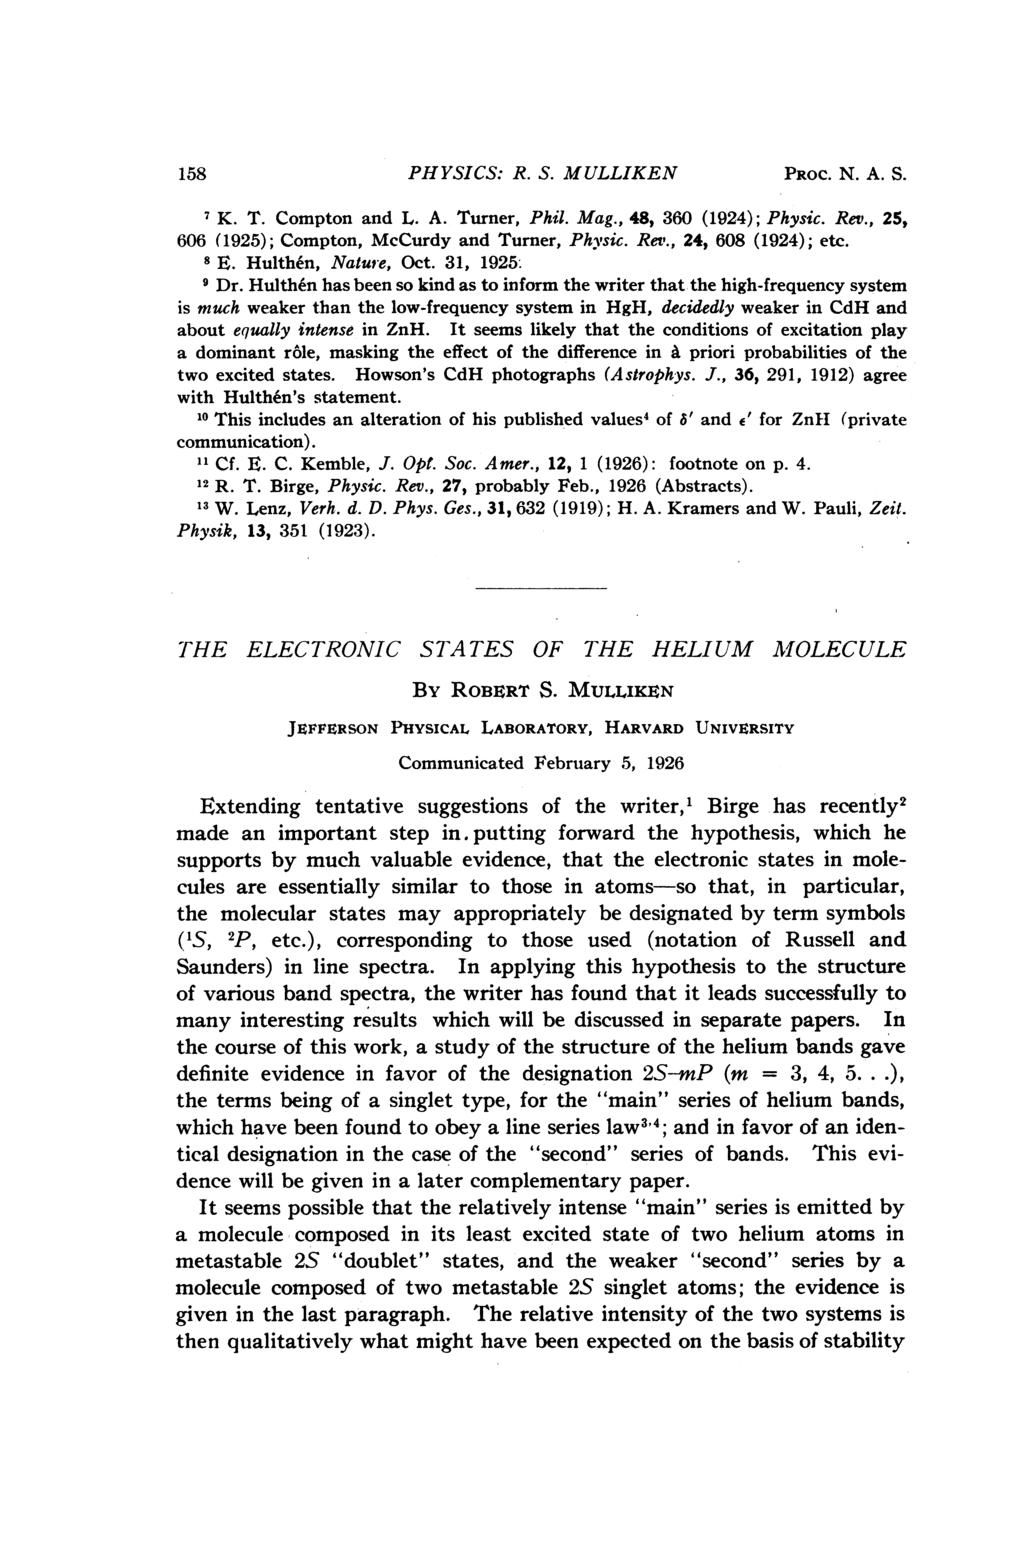 158 PHYSICS: R. S. MULLIKEN 7 K. T. Compton and L. A. Turner, Phil. Mag., 48, 360 (1924); Physic. Rev., 25, 606 (1925); Compton, McCurdy and Turner, Physic. Rev., 24, 608 (1924); etc. 8 E.